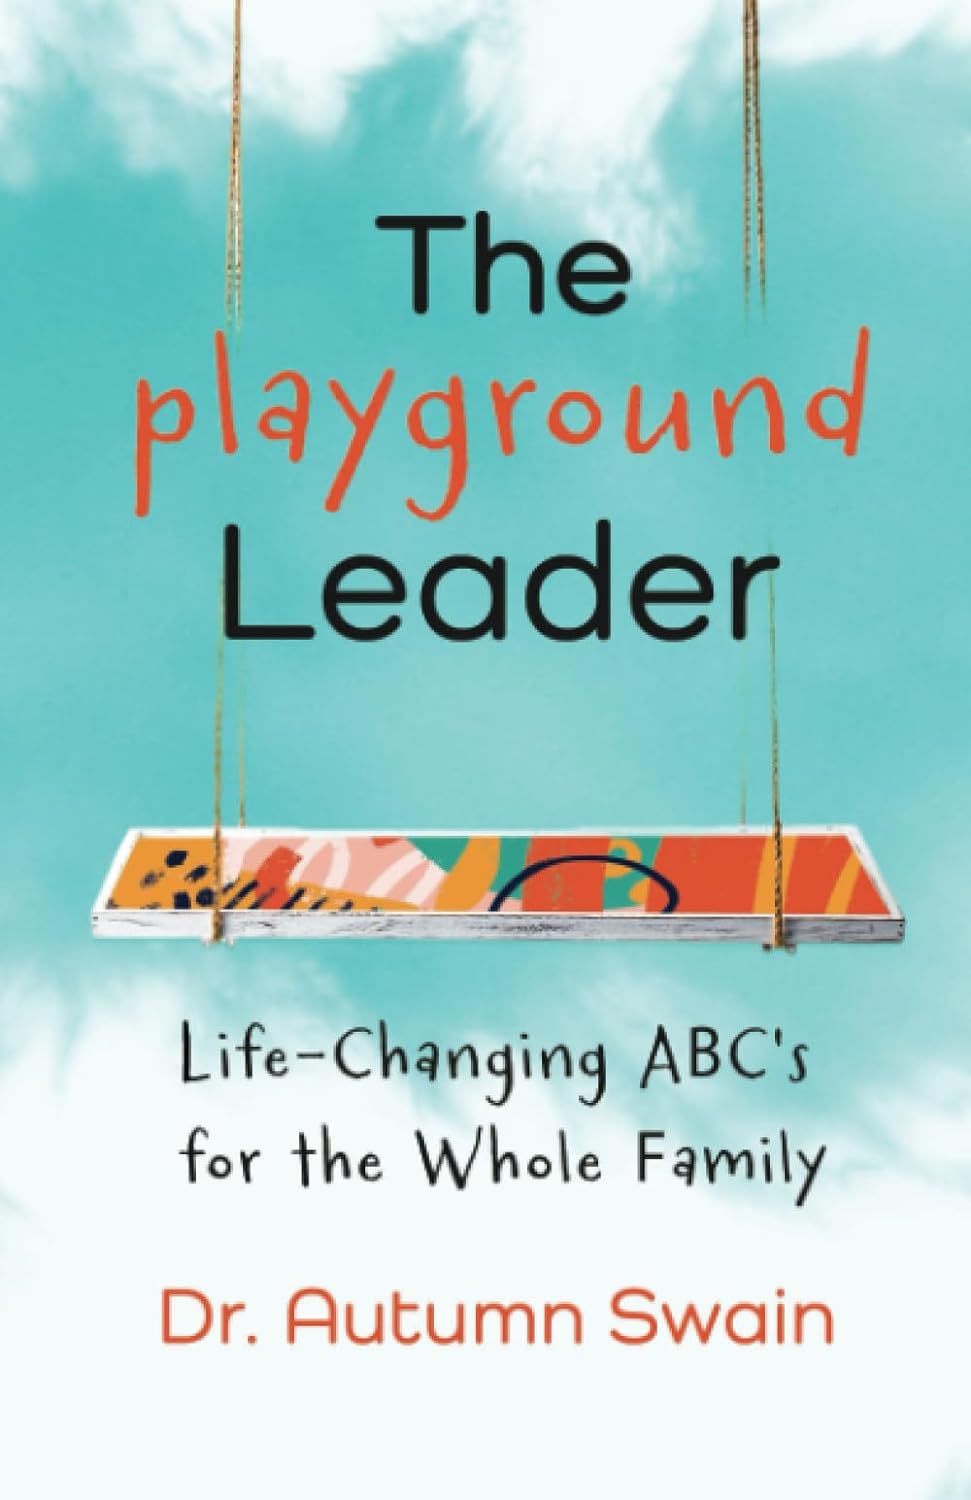 The Playground Leader: Life-Changing ABC's for the Whole Family by Dr. Autumn Swain